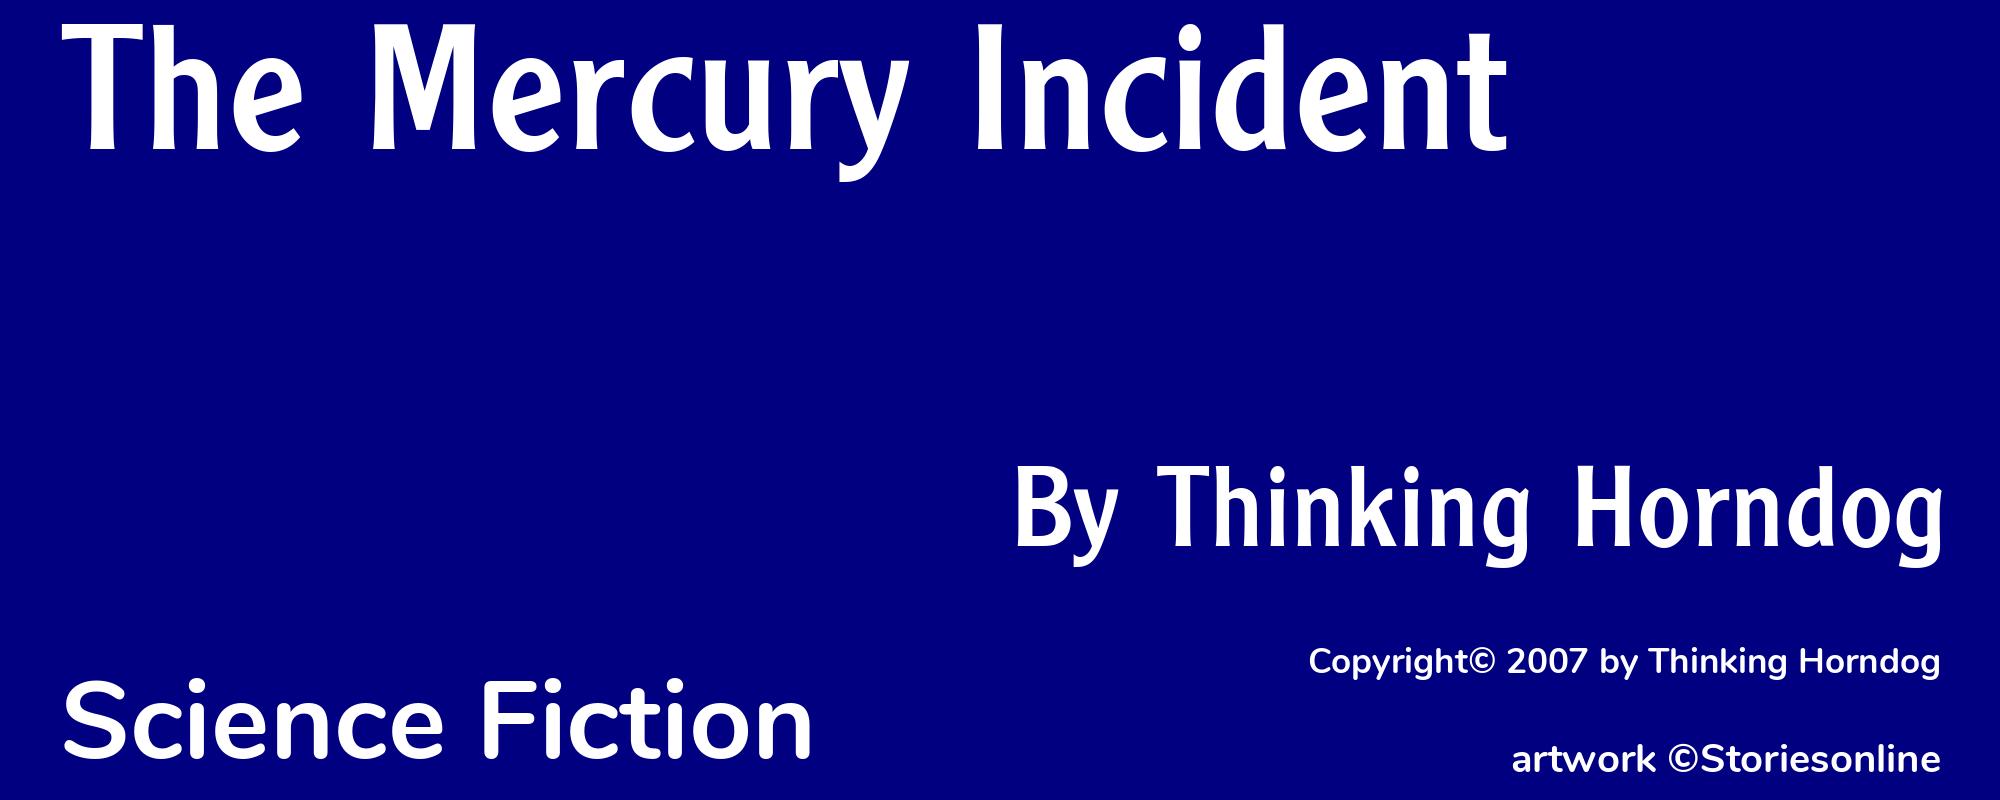 The Mercury Incident - Cover